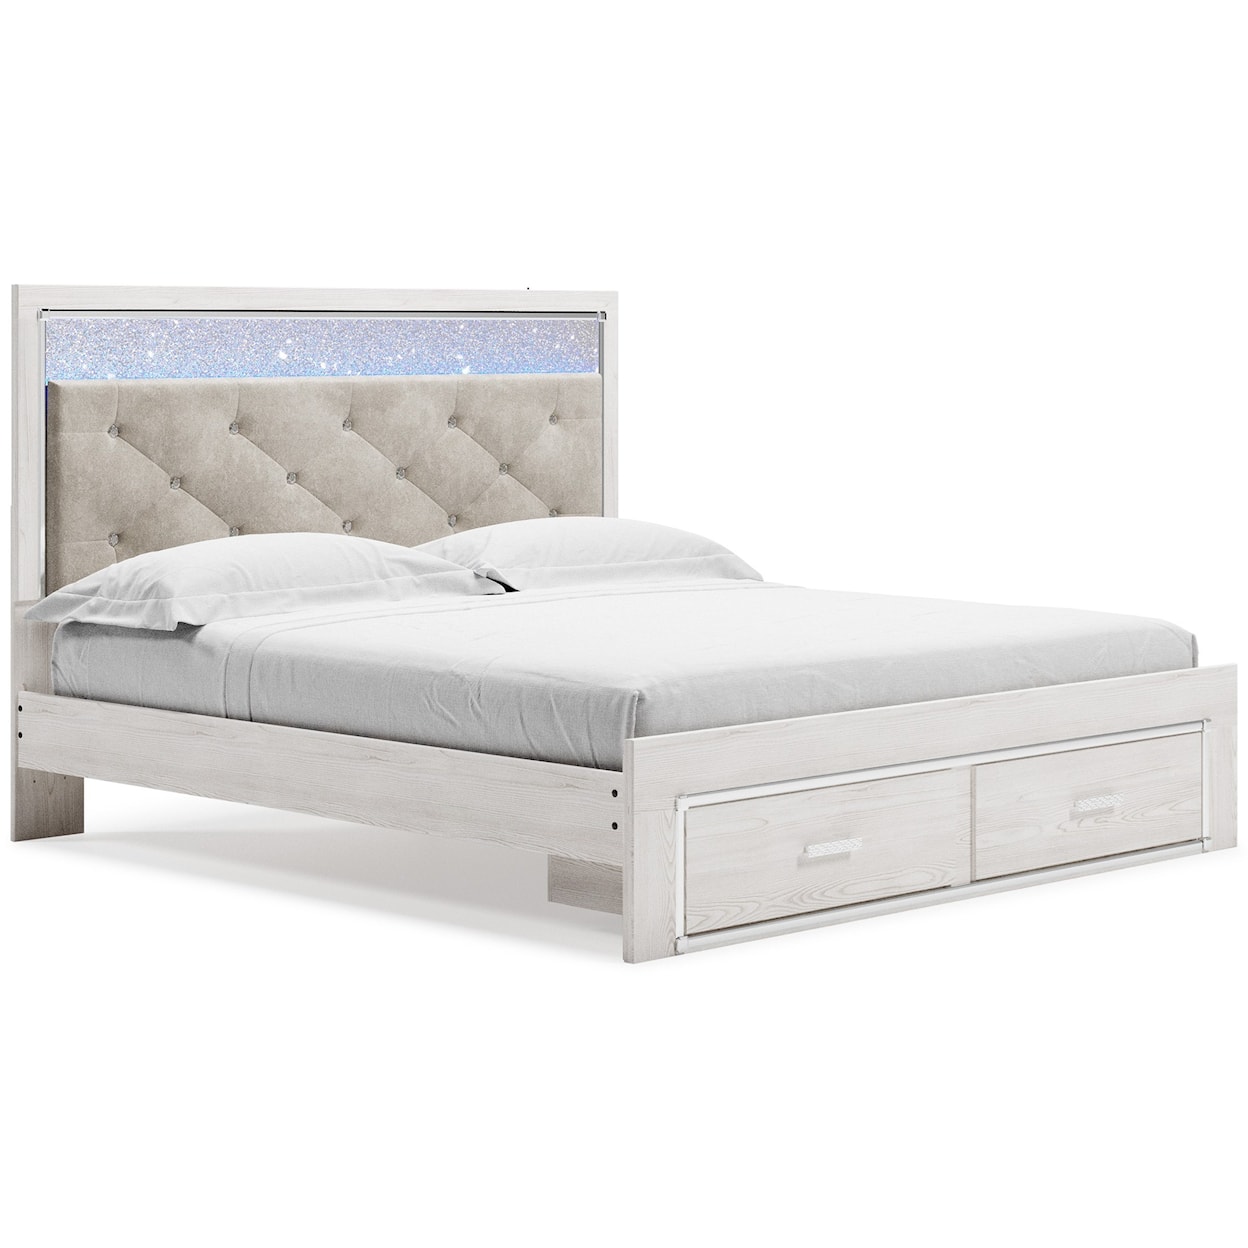 Signature Design by Ashley Furniture Altyra King Storage Bed with Upholstered Headboard